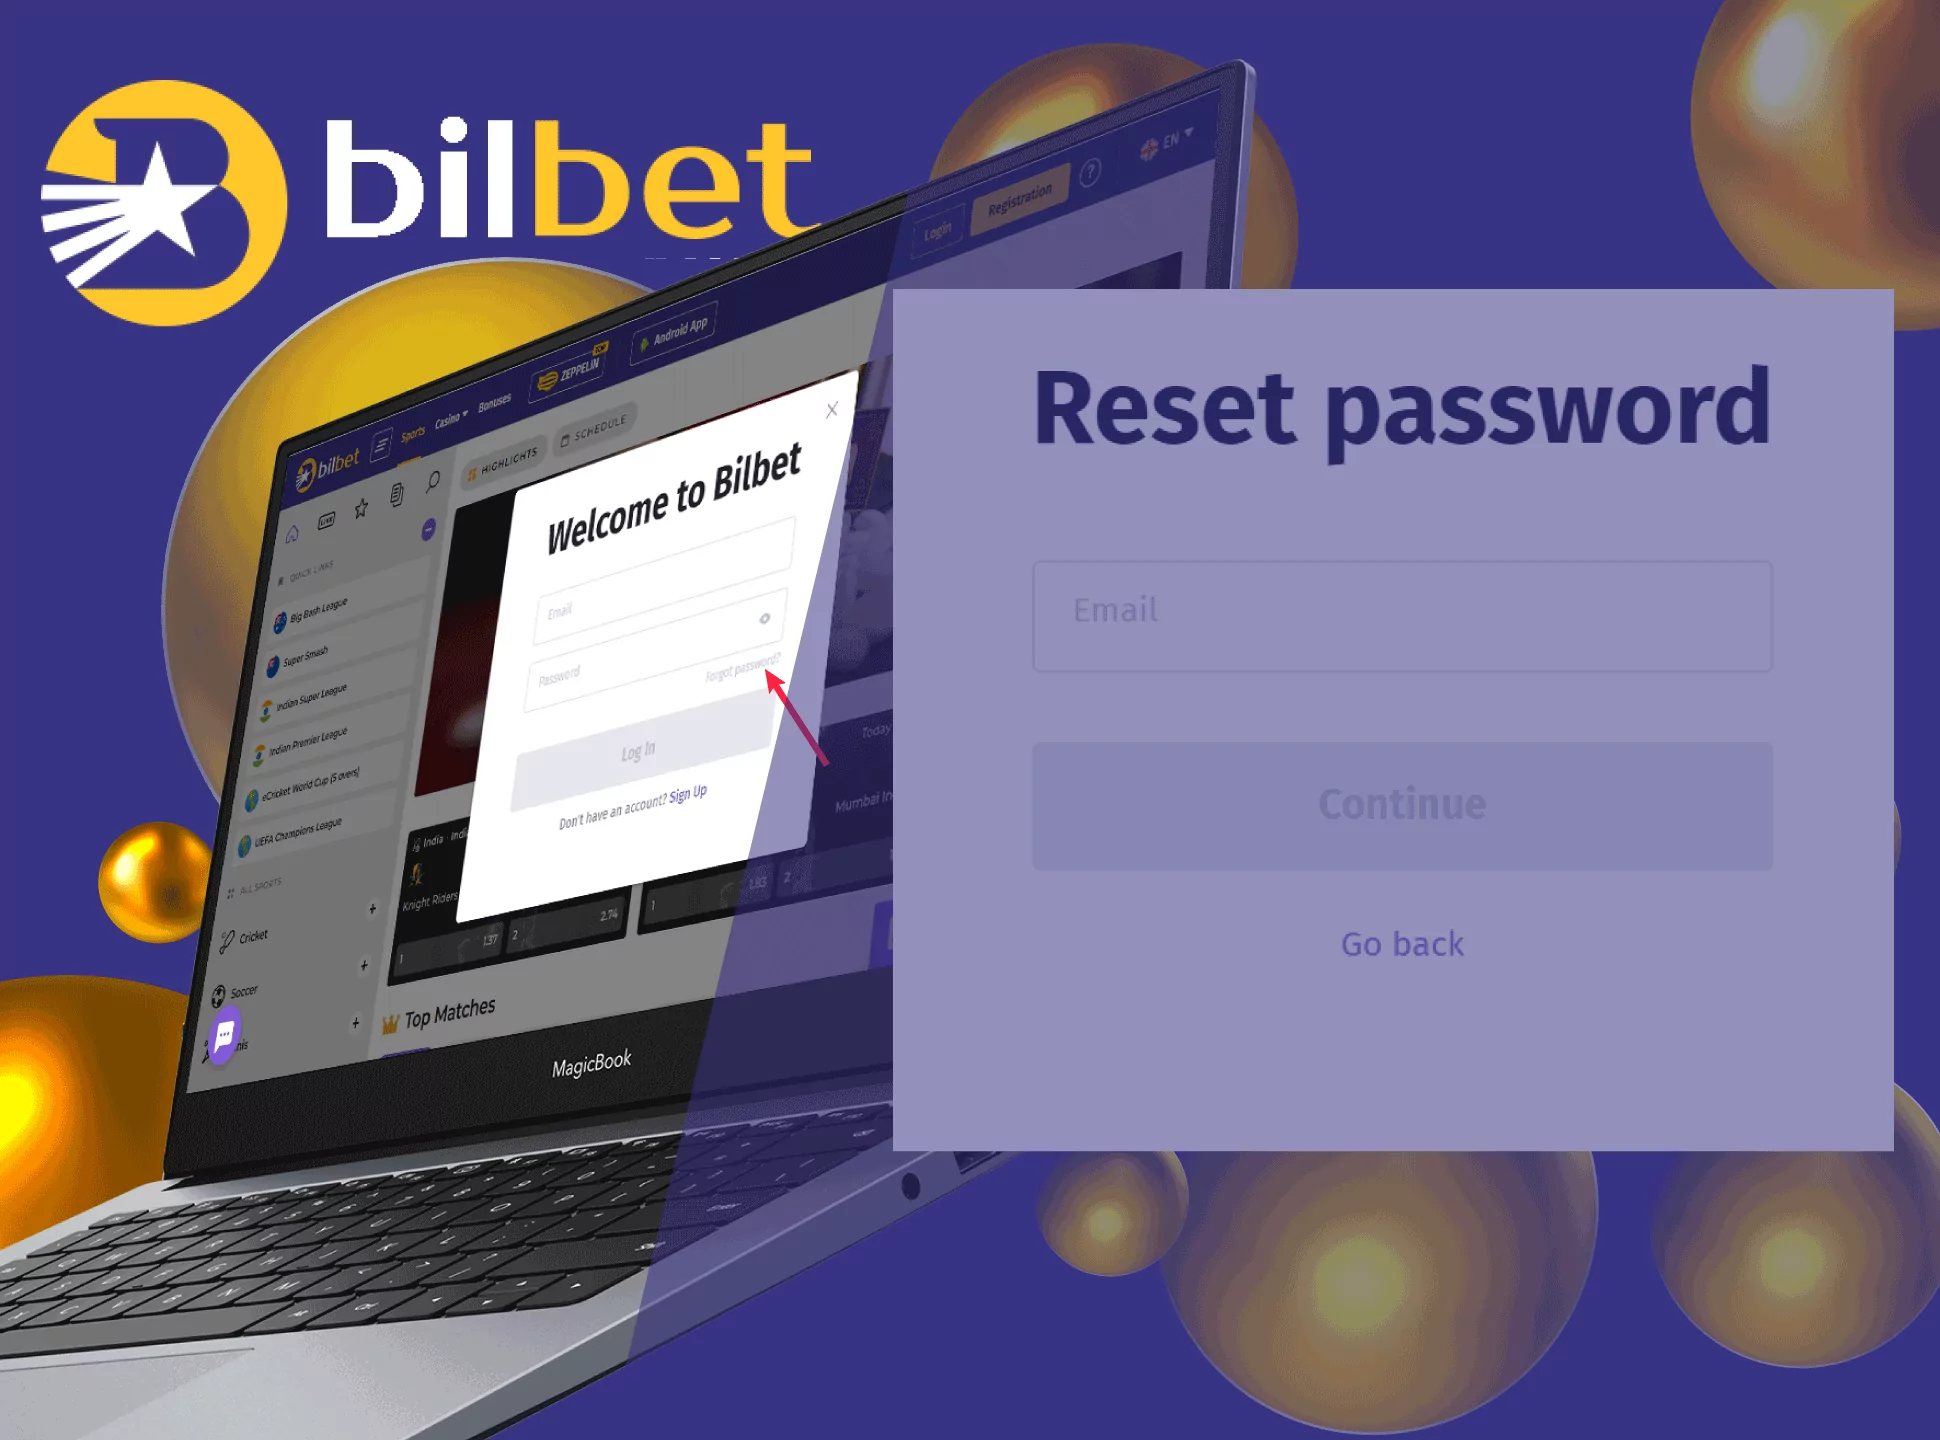 You can reset your password if you forget it.